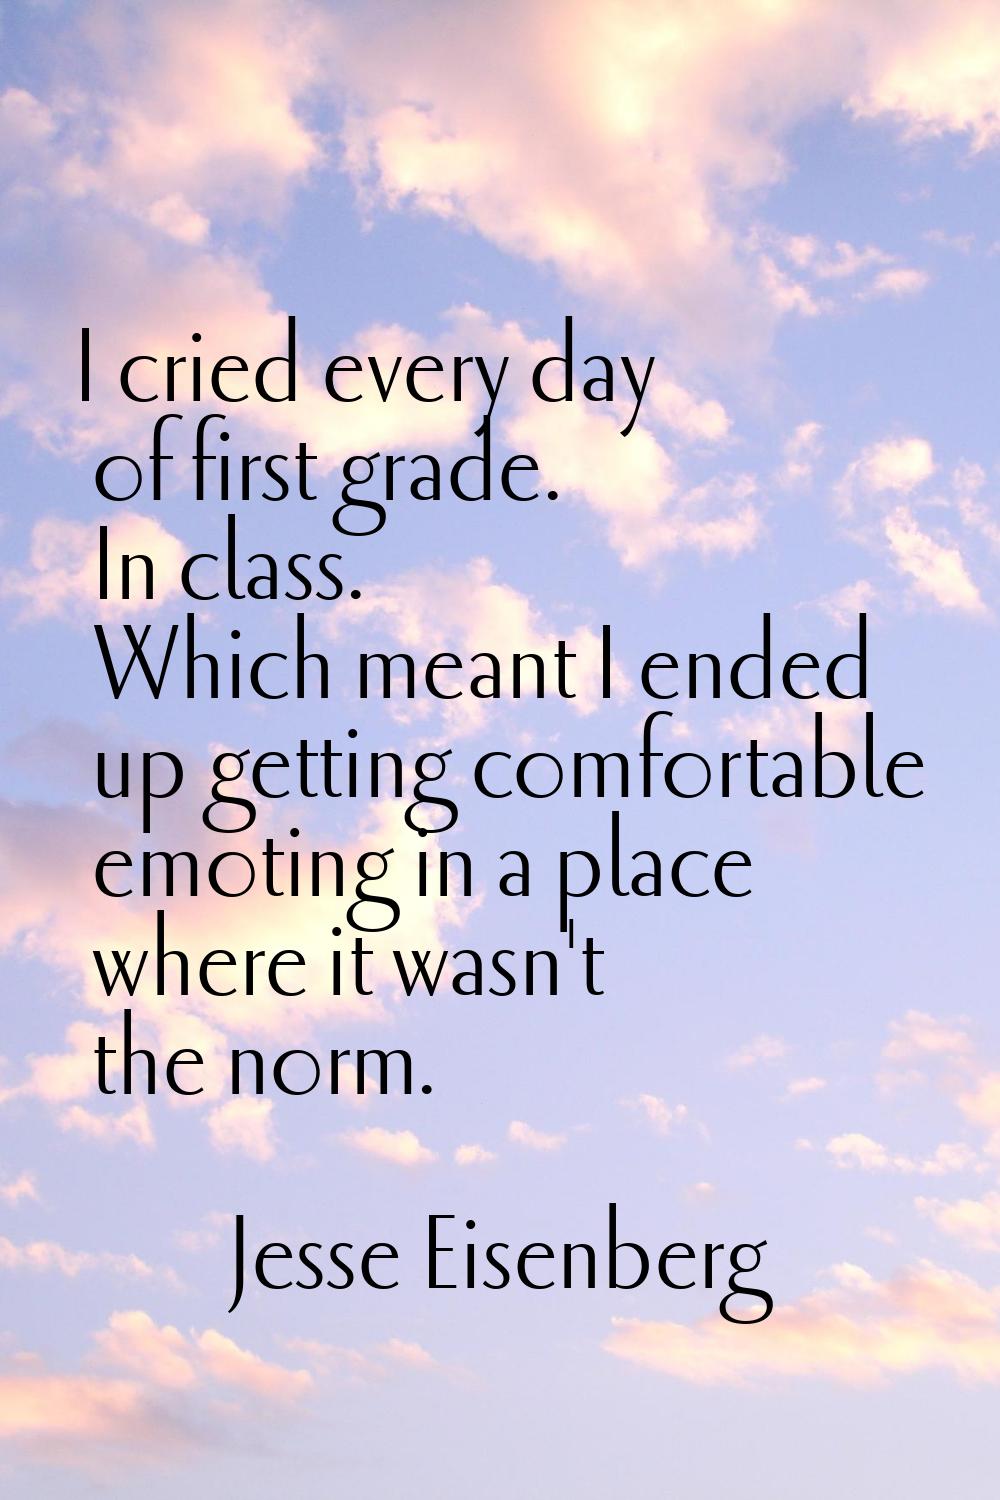 I cried every day of first grade. In class. Which meant I ended up getting comfortable emoting in a